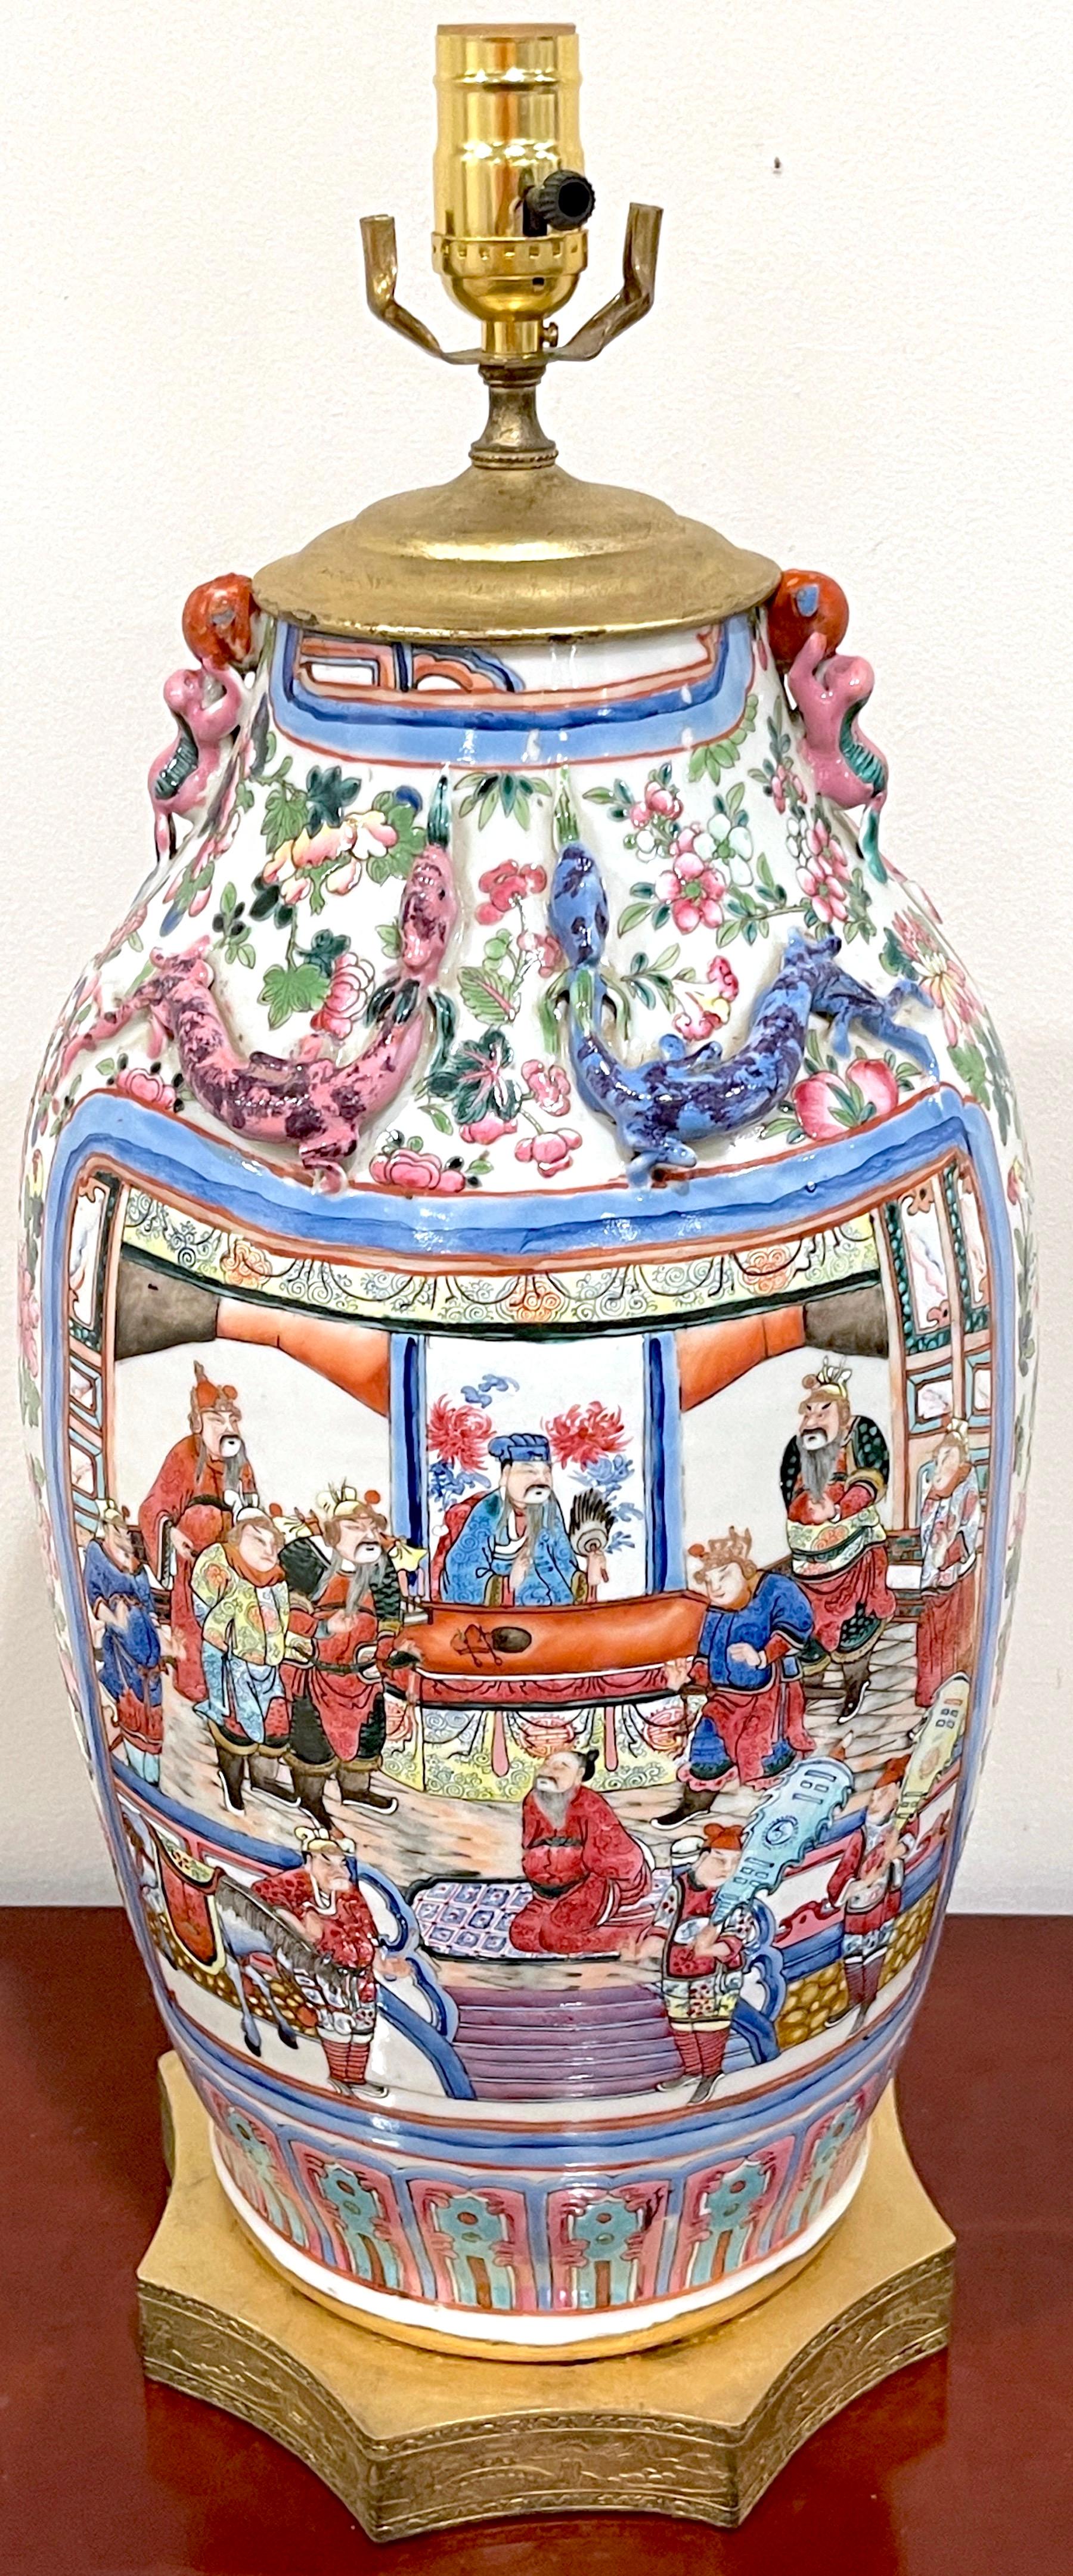 Chinese Export Mandarin Warrior Famille Rose Vase, Now as a Lamp
The porcelain vase, China circa 1860
The gilt mountings and lamping USA, Circa 1925

A magnificent Chinese Export Mandarin Warrior Famille Rose Vase,  originating  from China around